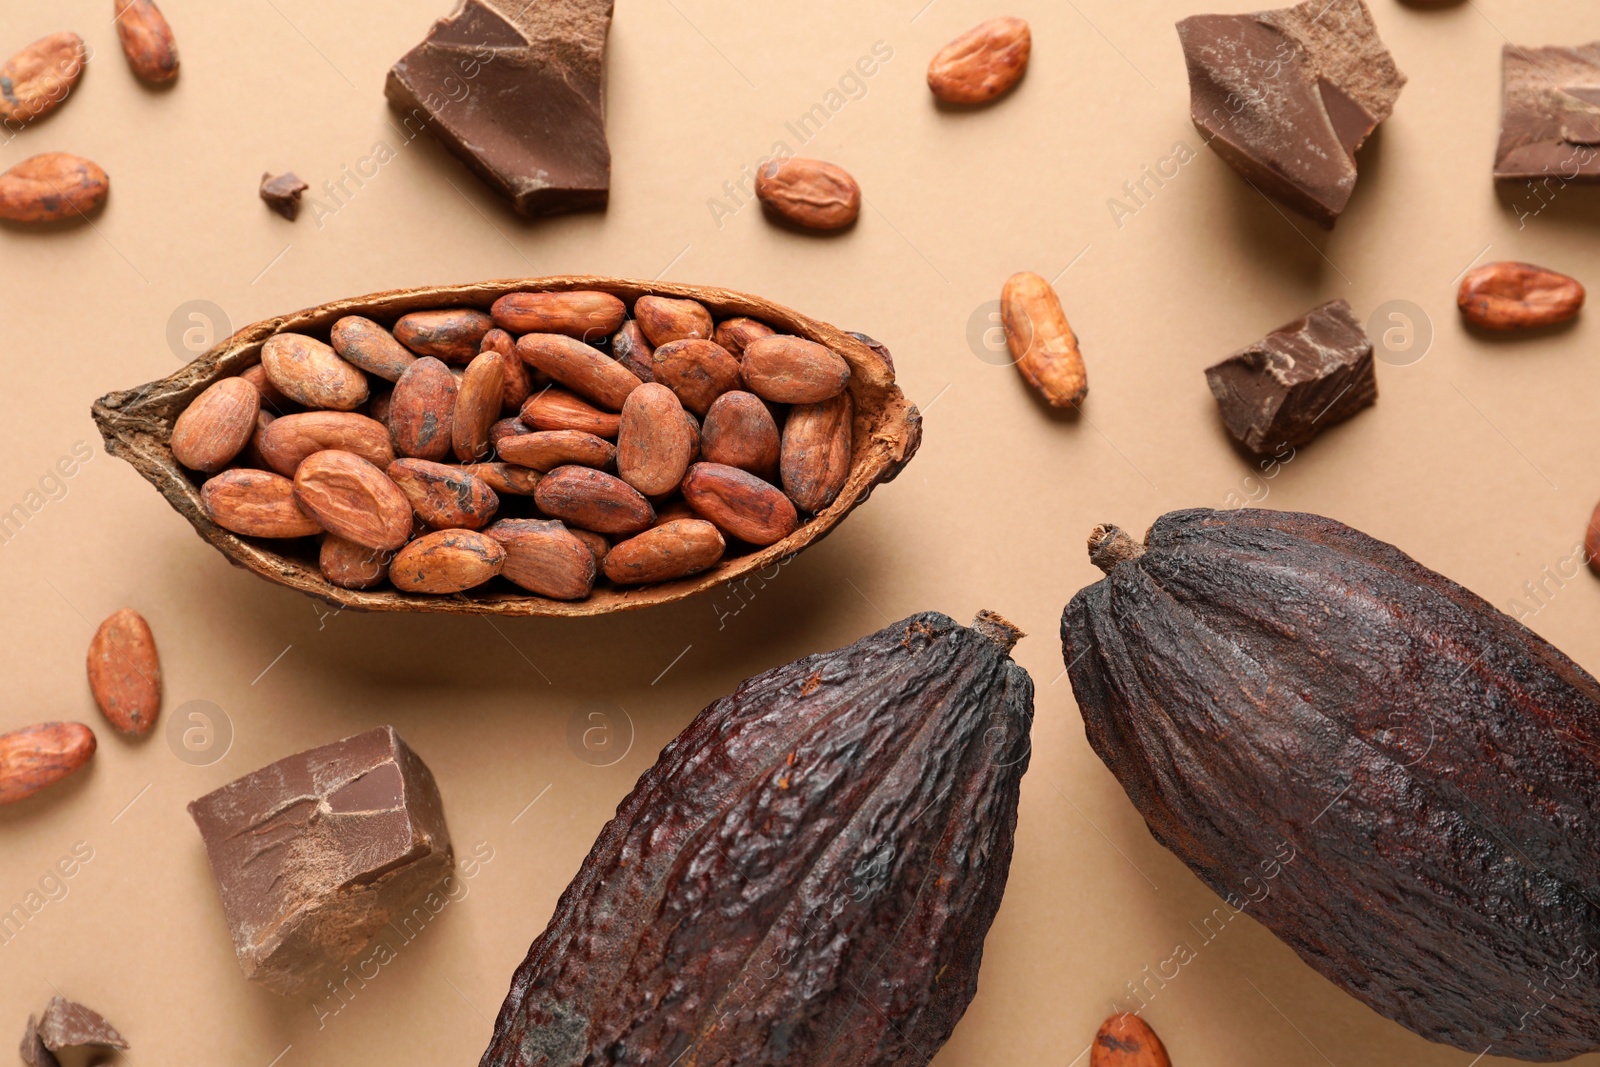 Photo of Cocoa pods with beans and chocolate pieces on beige background